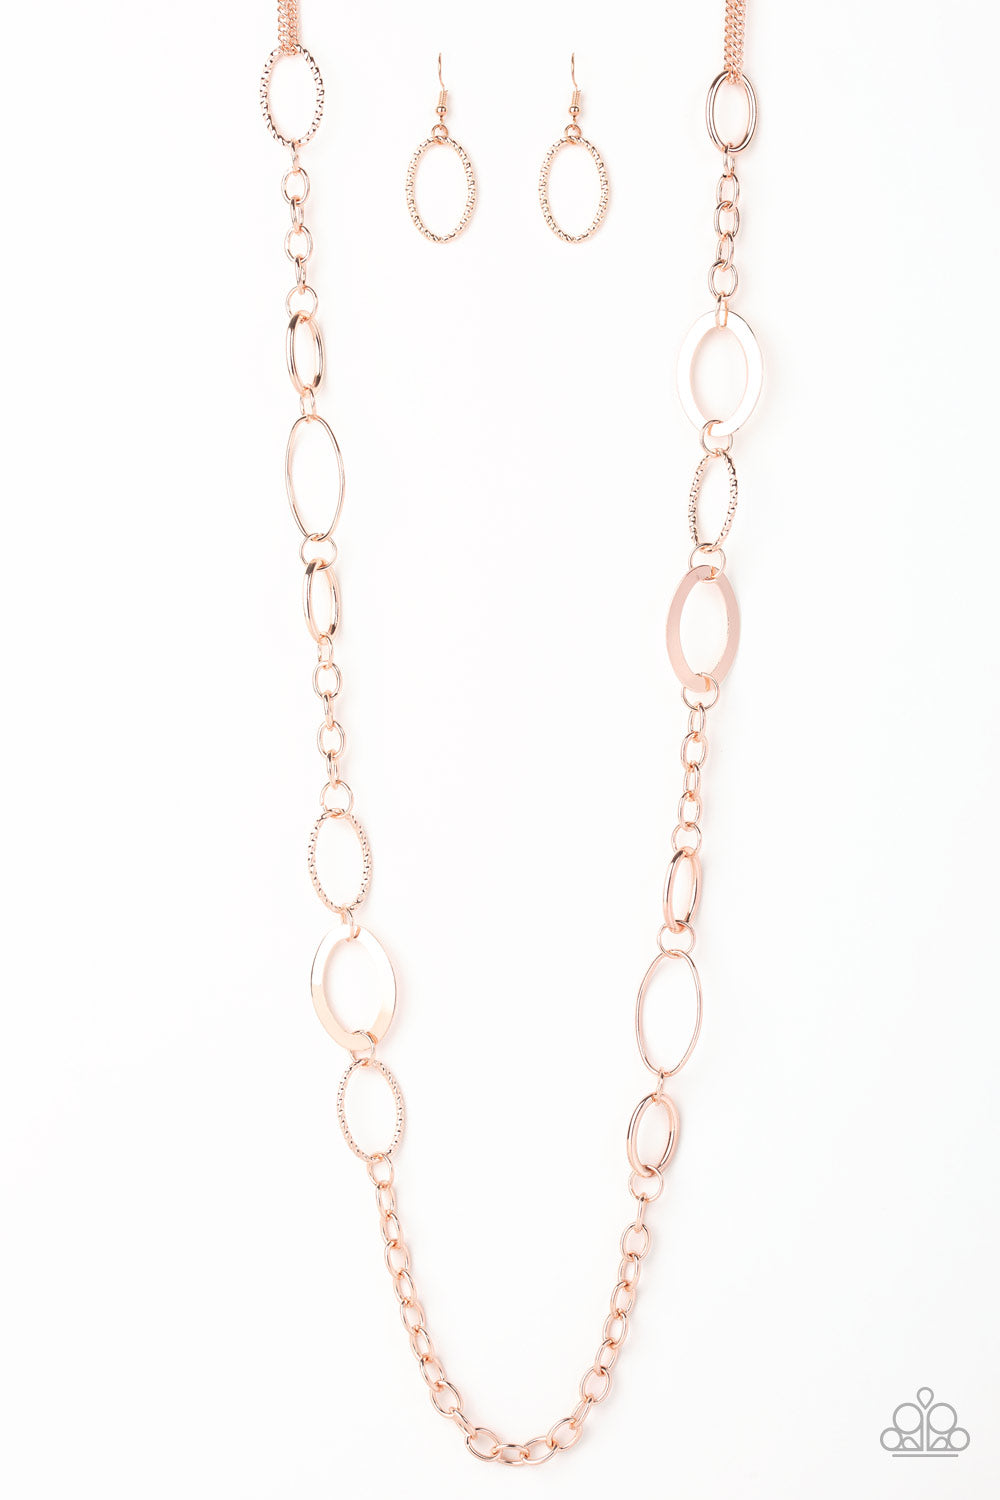 Chain Cadence - Rose Gold